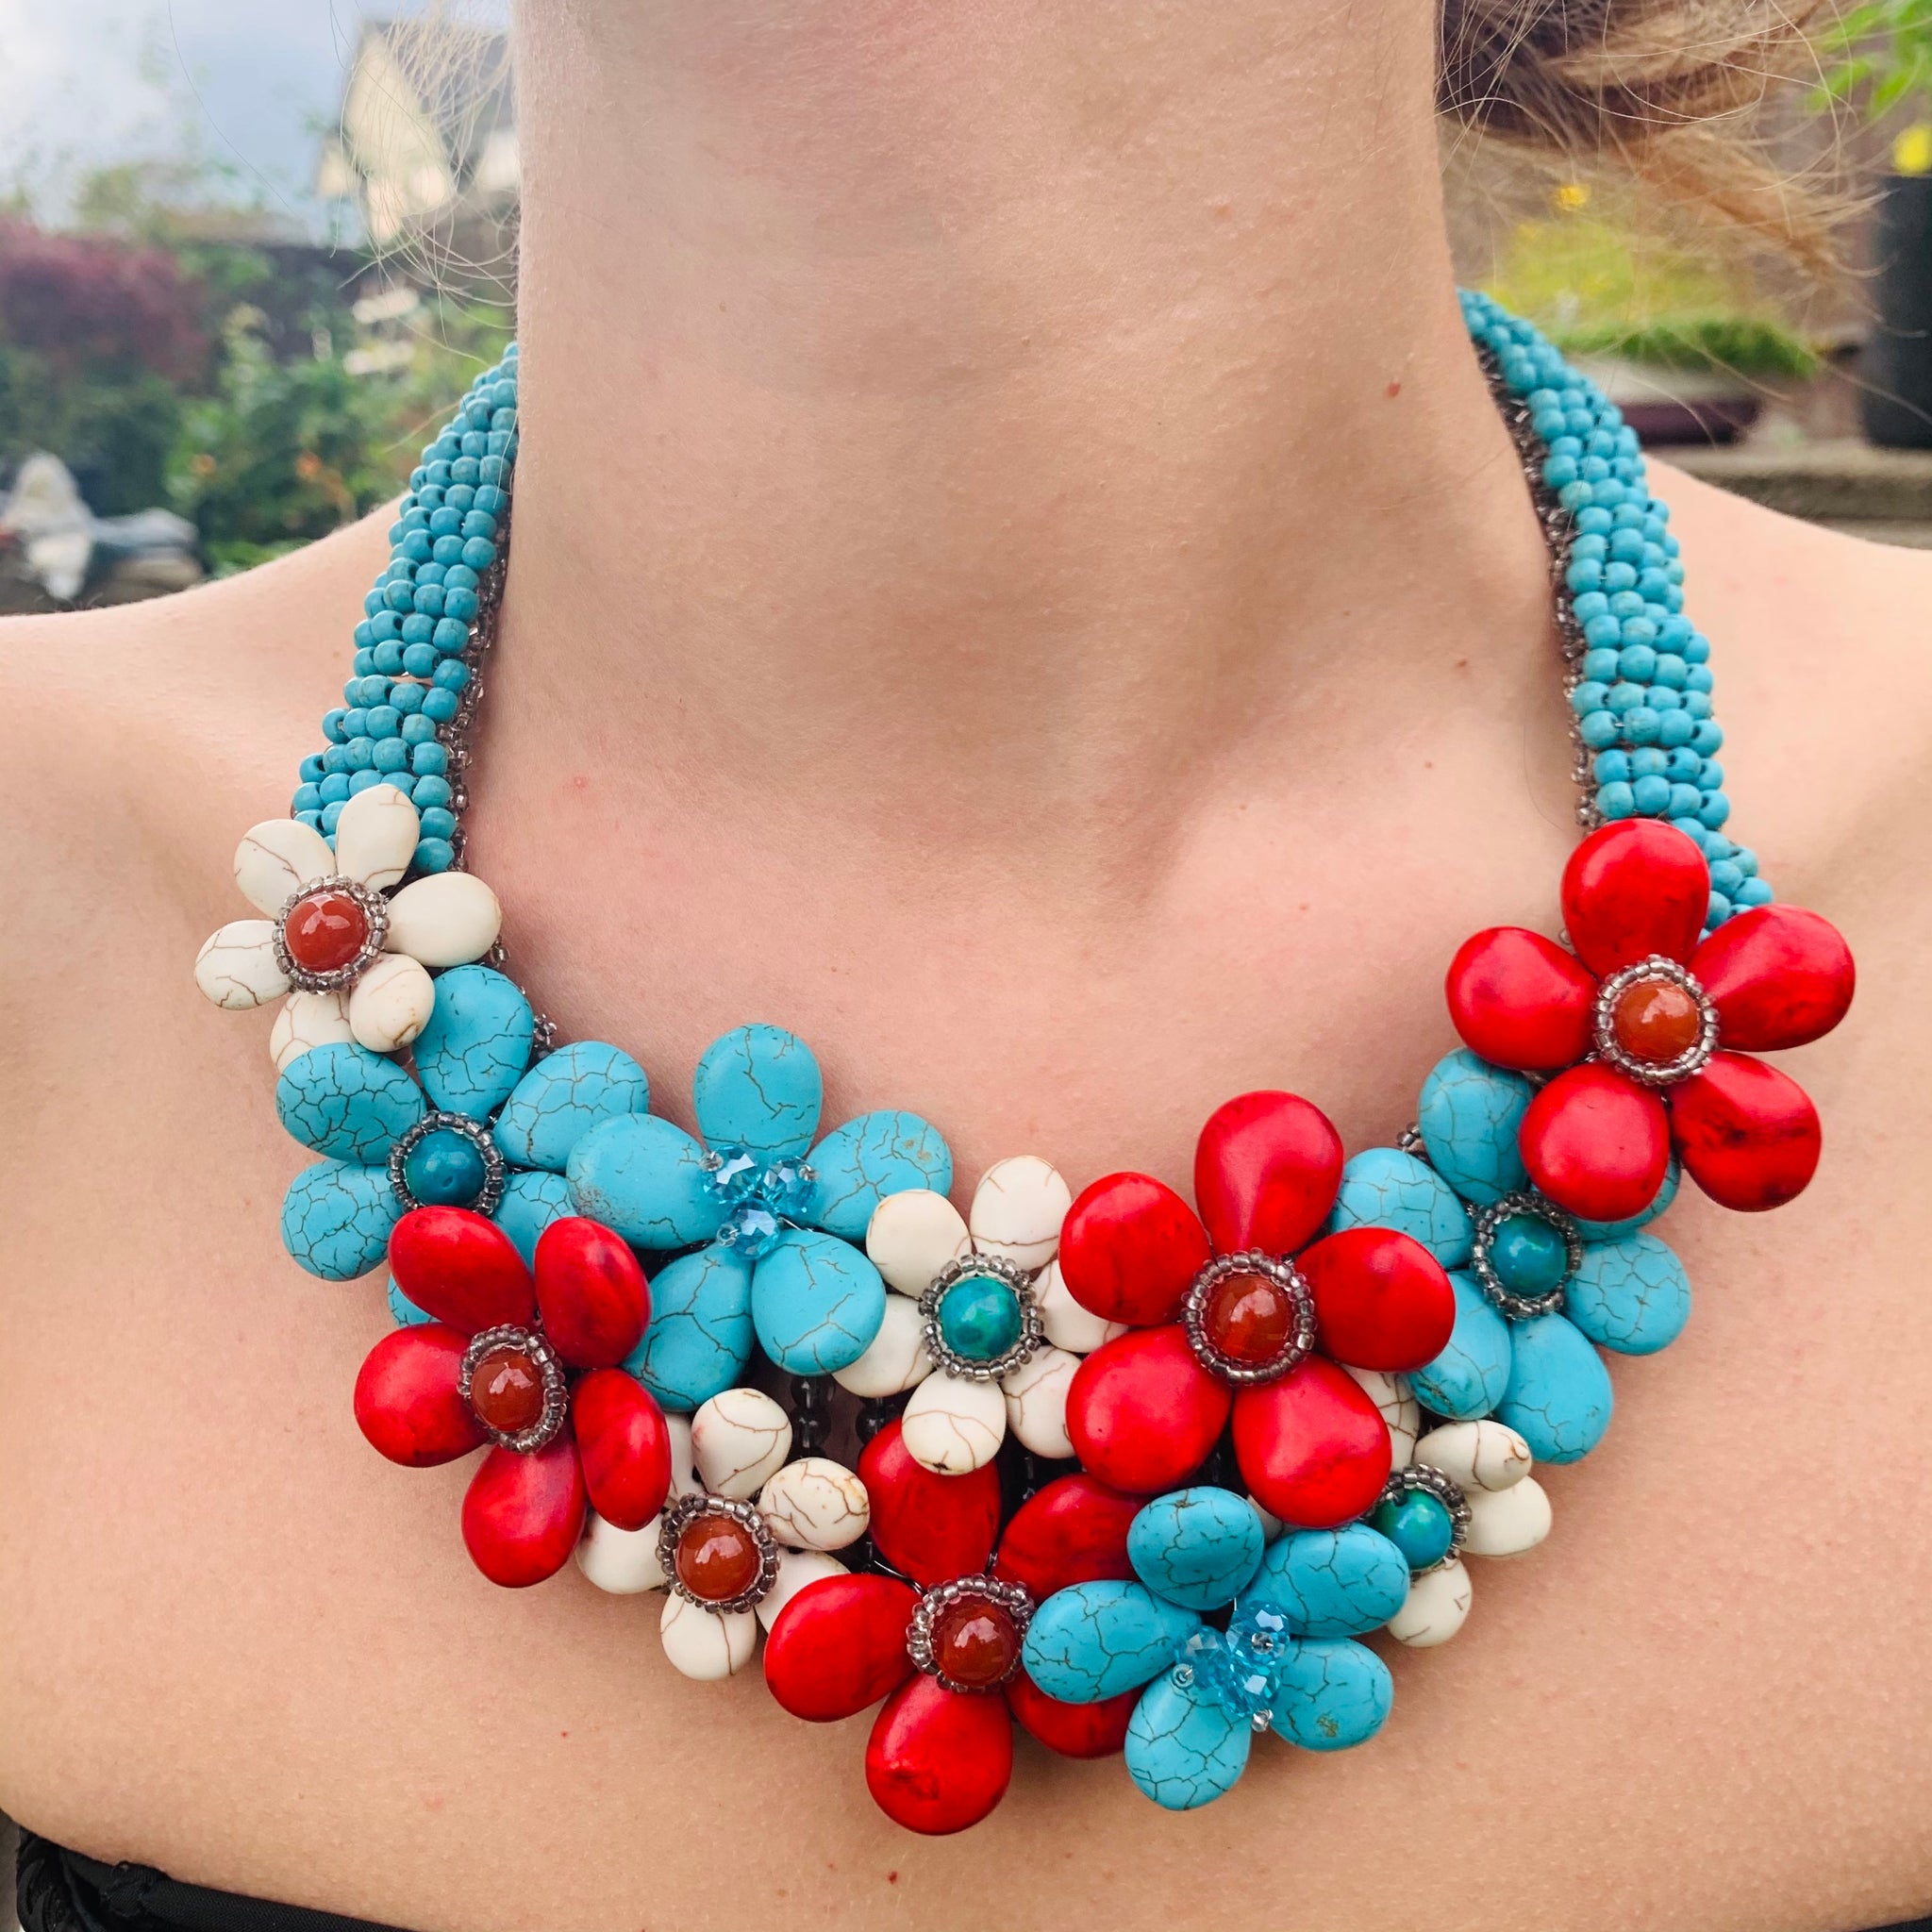 Handmade Gorgeous Bib Choker Turquoise & Red Agate 20" Unique Necklace